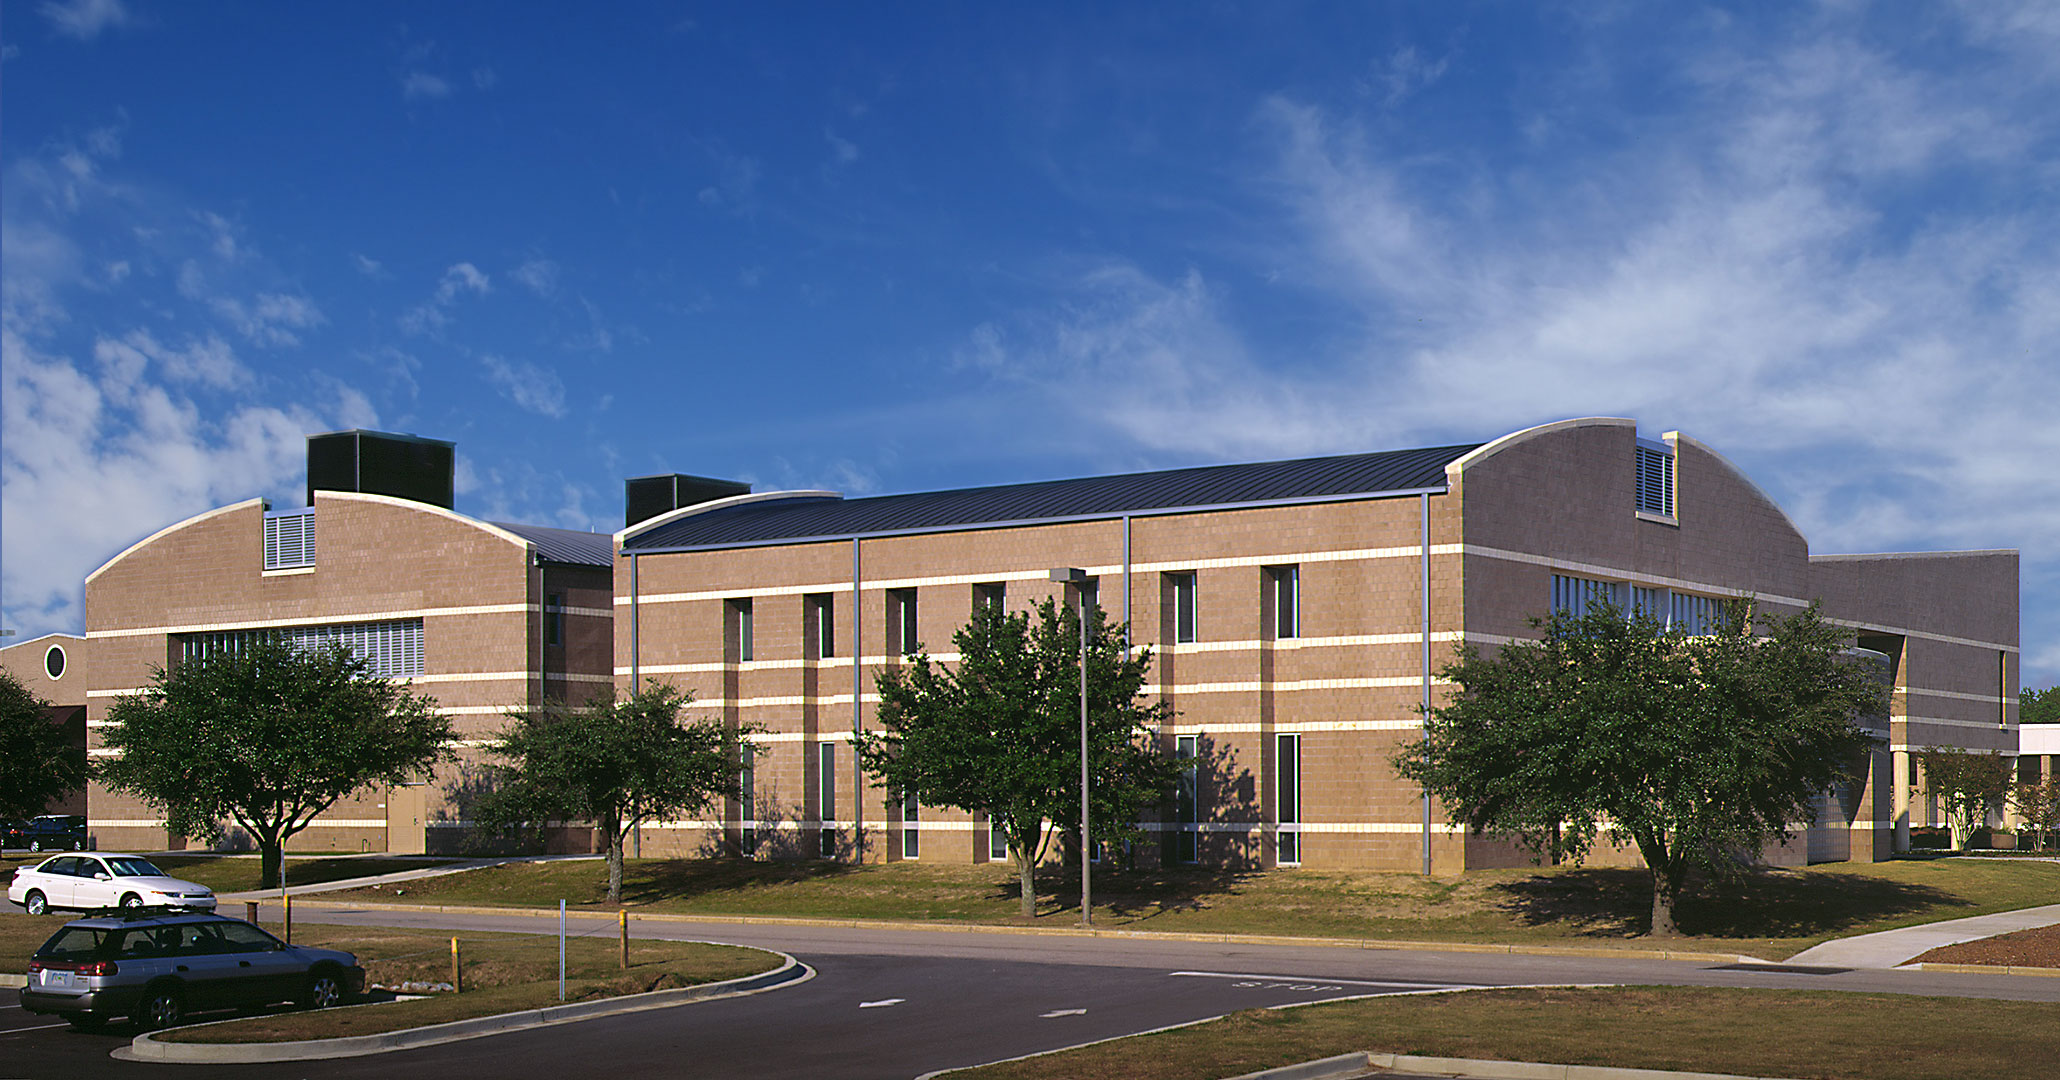 Midlands Technical College worked with Boudreaux architects to build a new Health and Science Building at the Airport Campus.